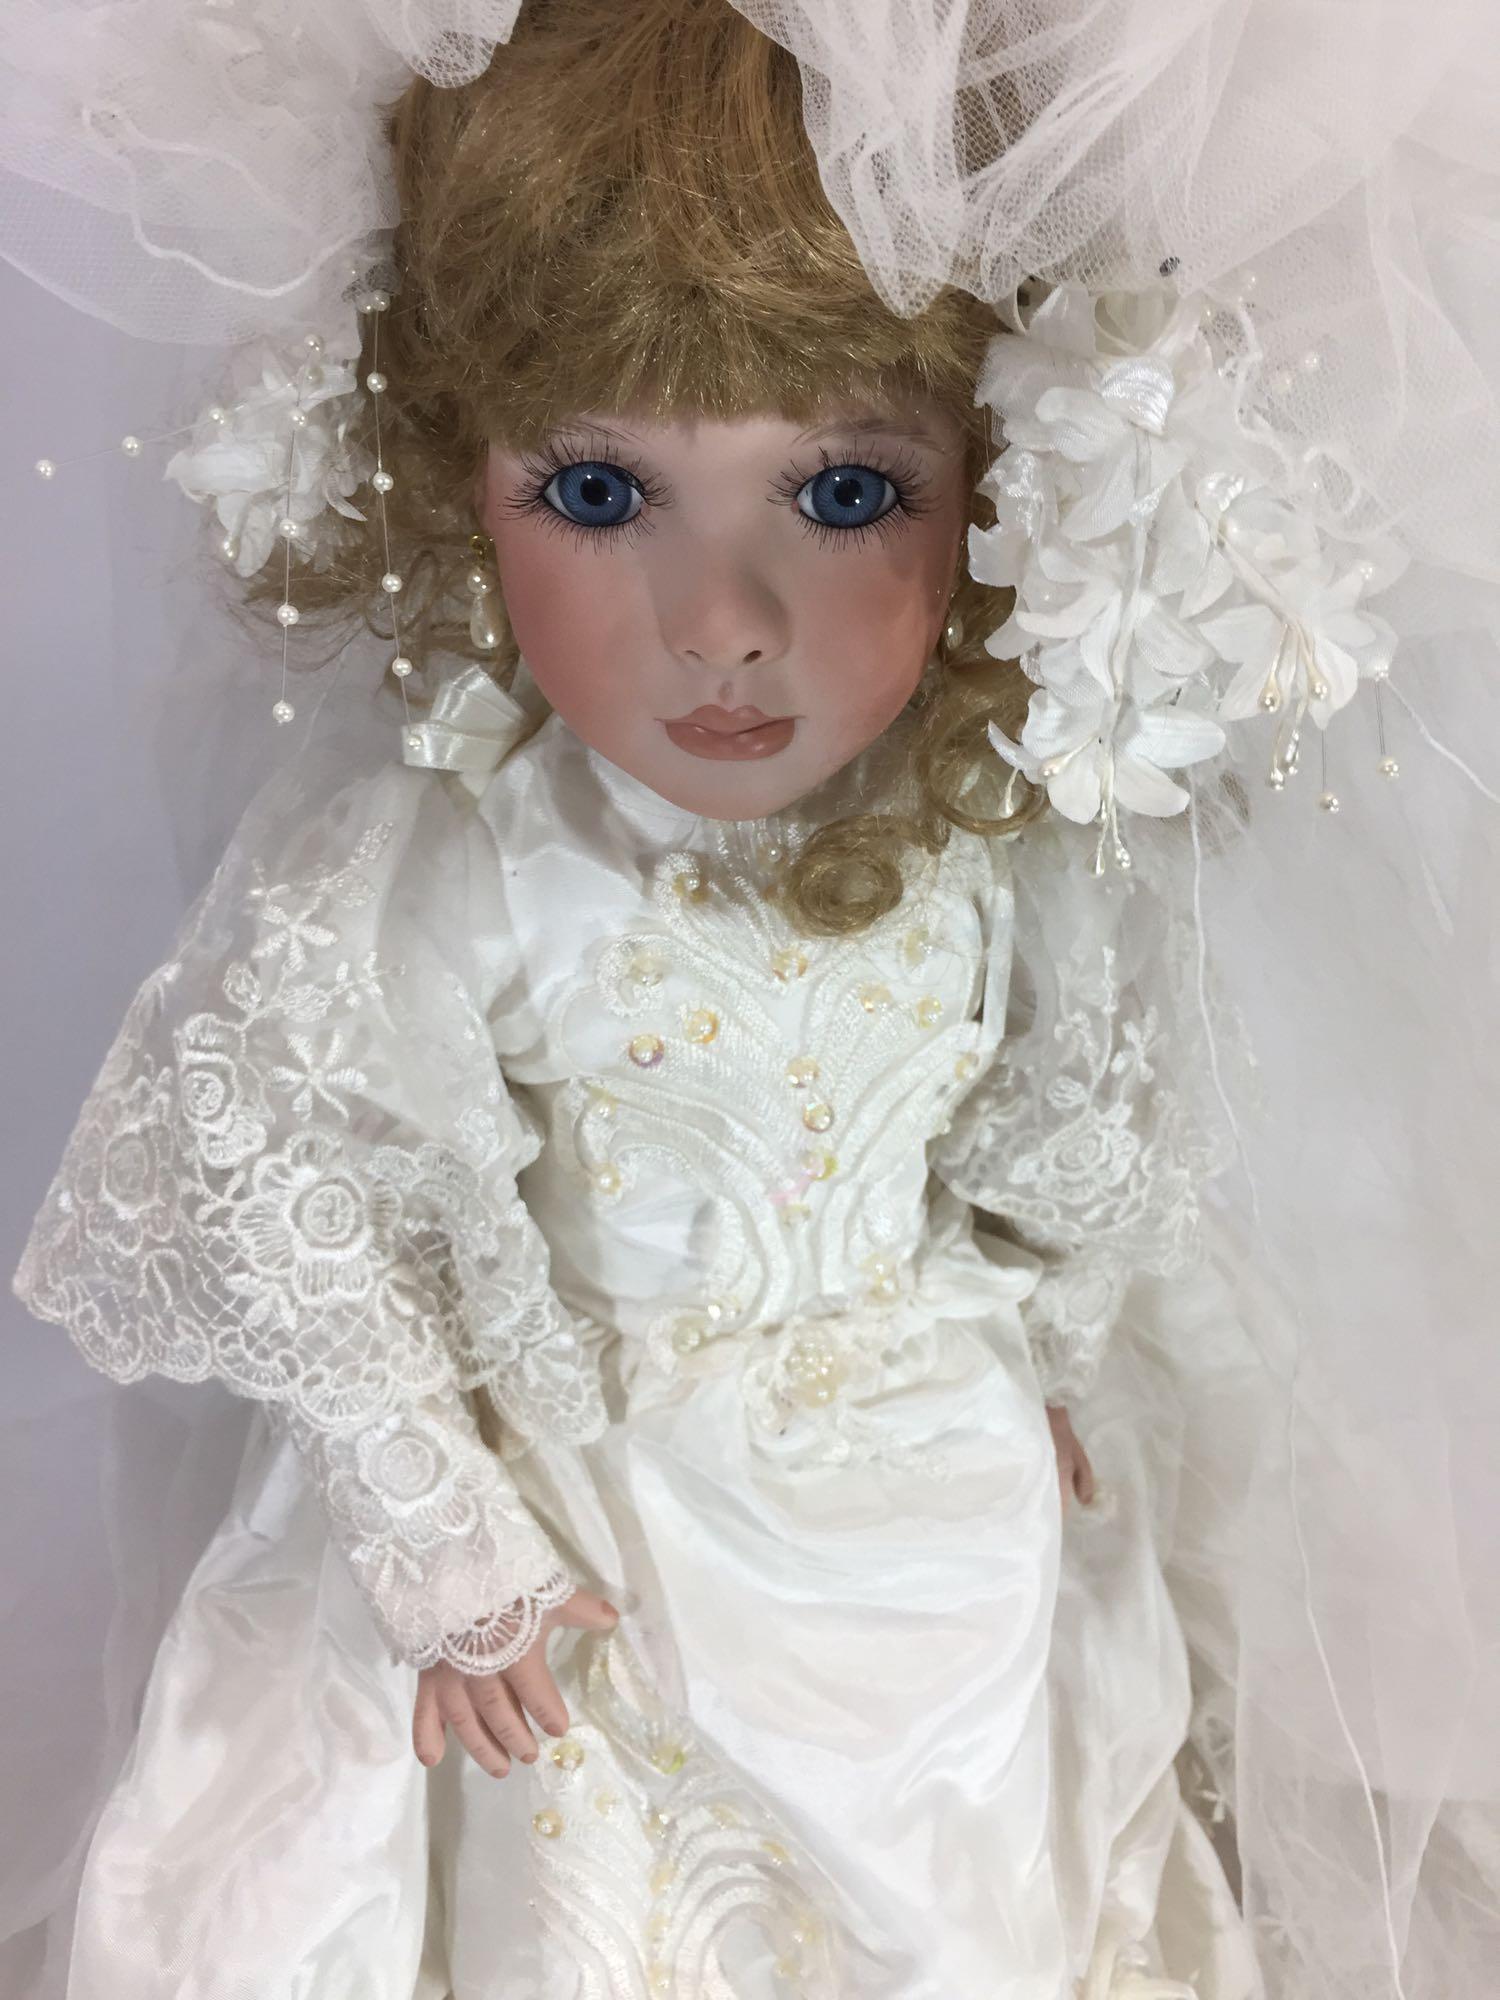 Kais Doll 26in Tall - Limited Edition 1010/1500